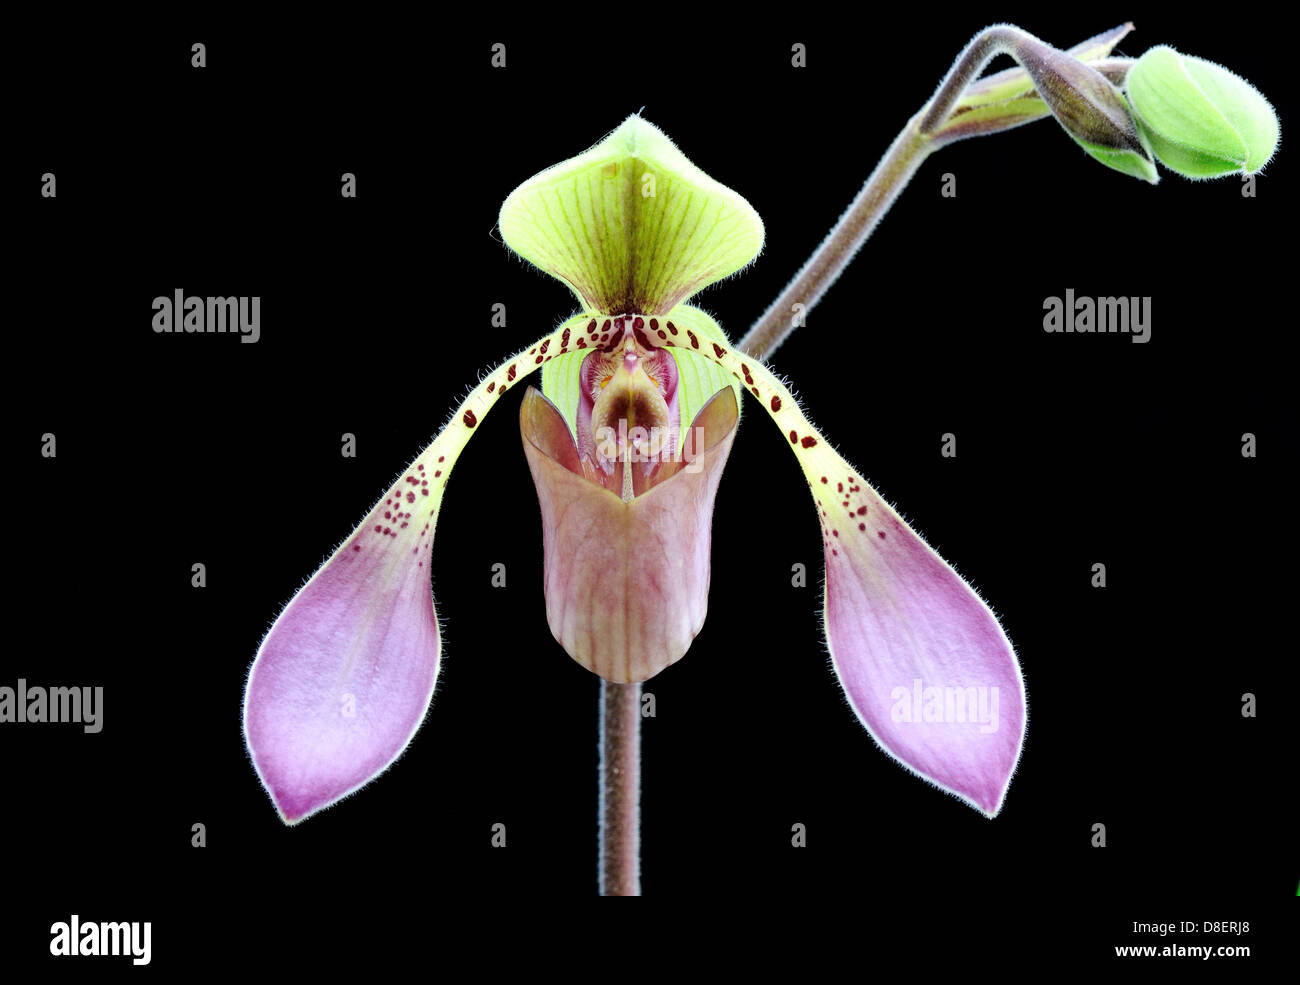 Lady's slipper orchid flower and bud, Paphiopedilum Paph lowii. Stock Photo